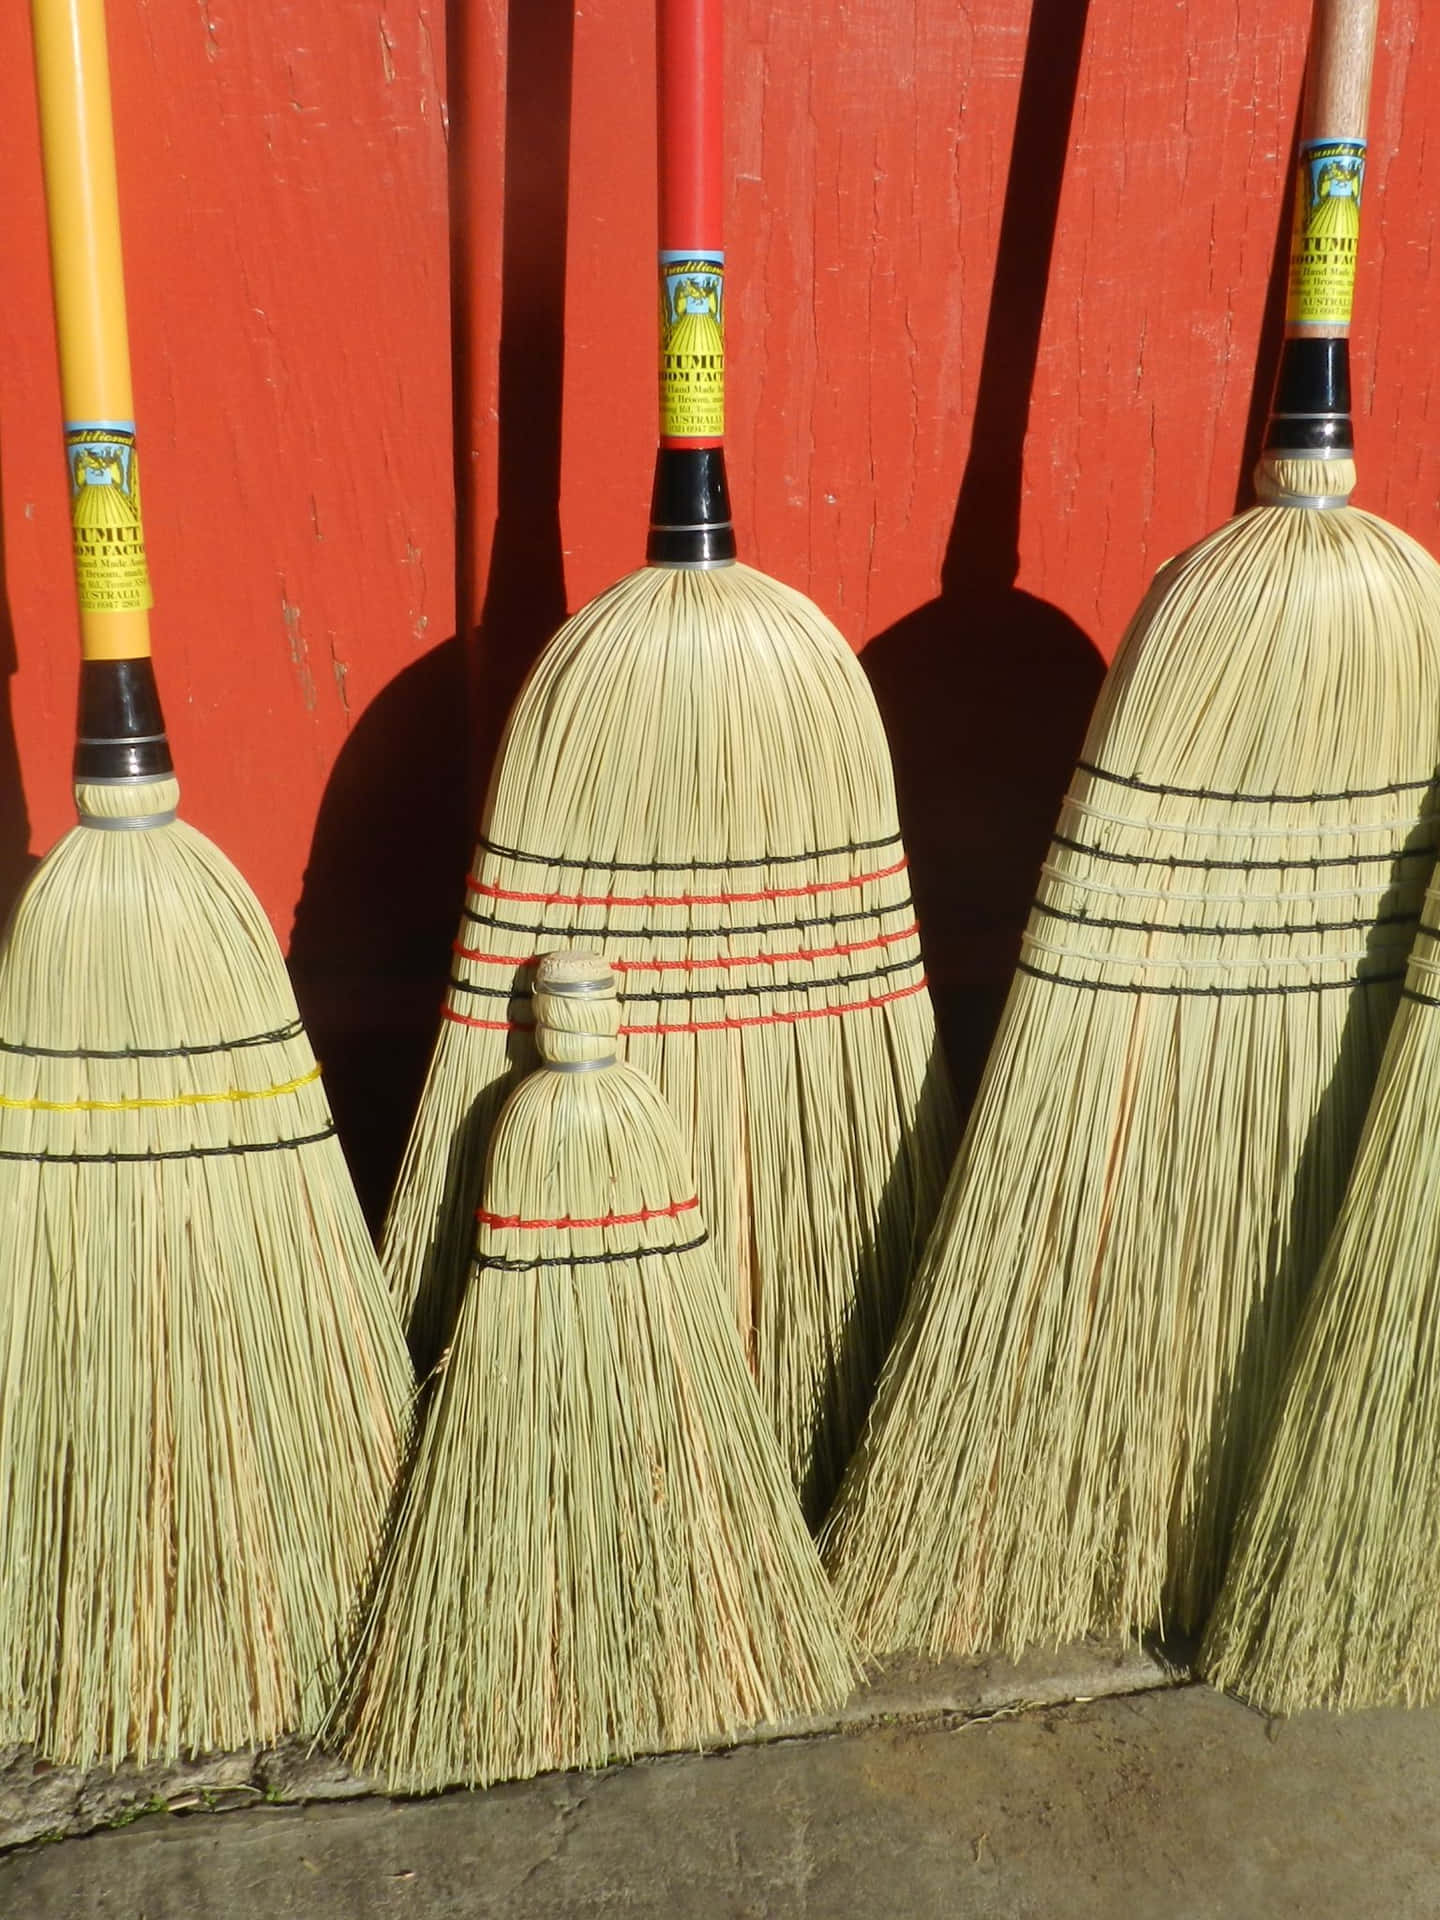 Keep Your Home Clean with A Broom